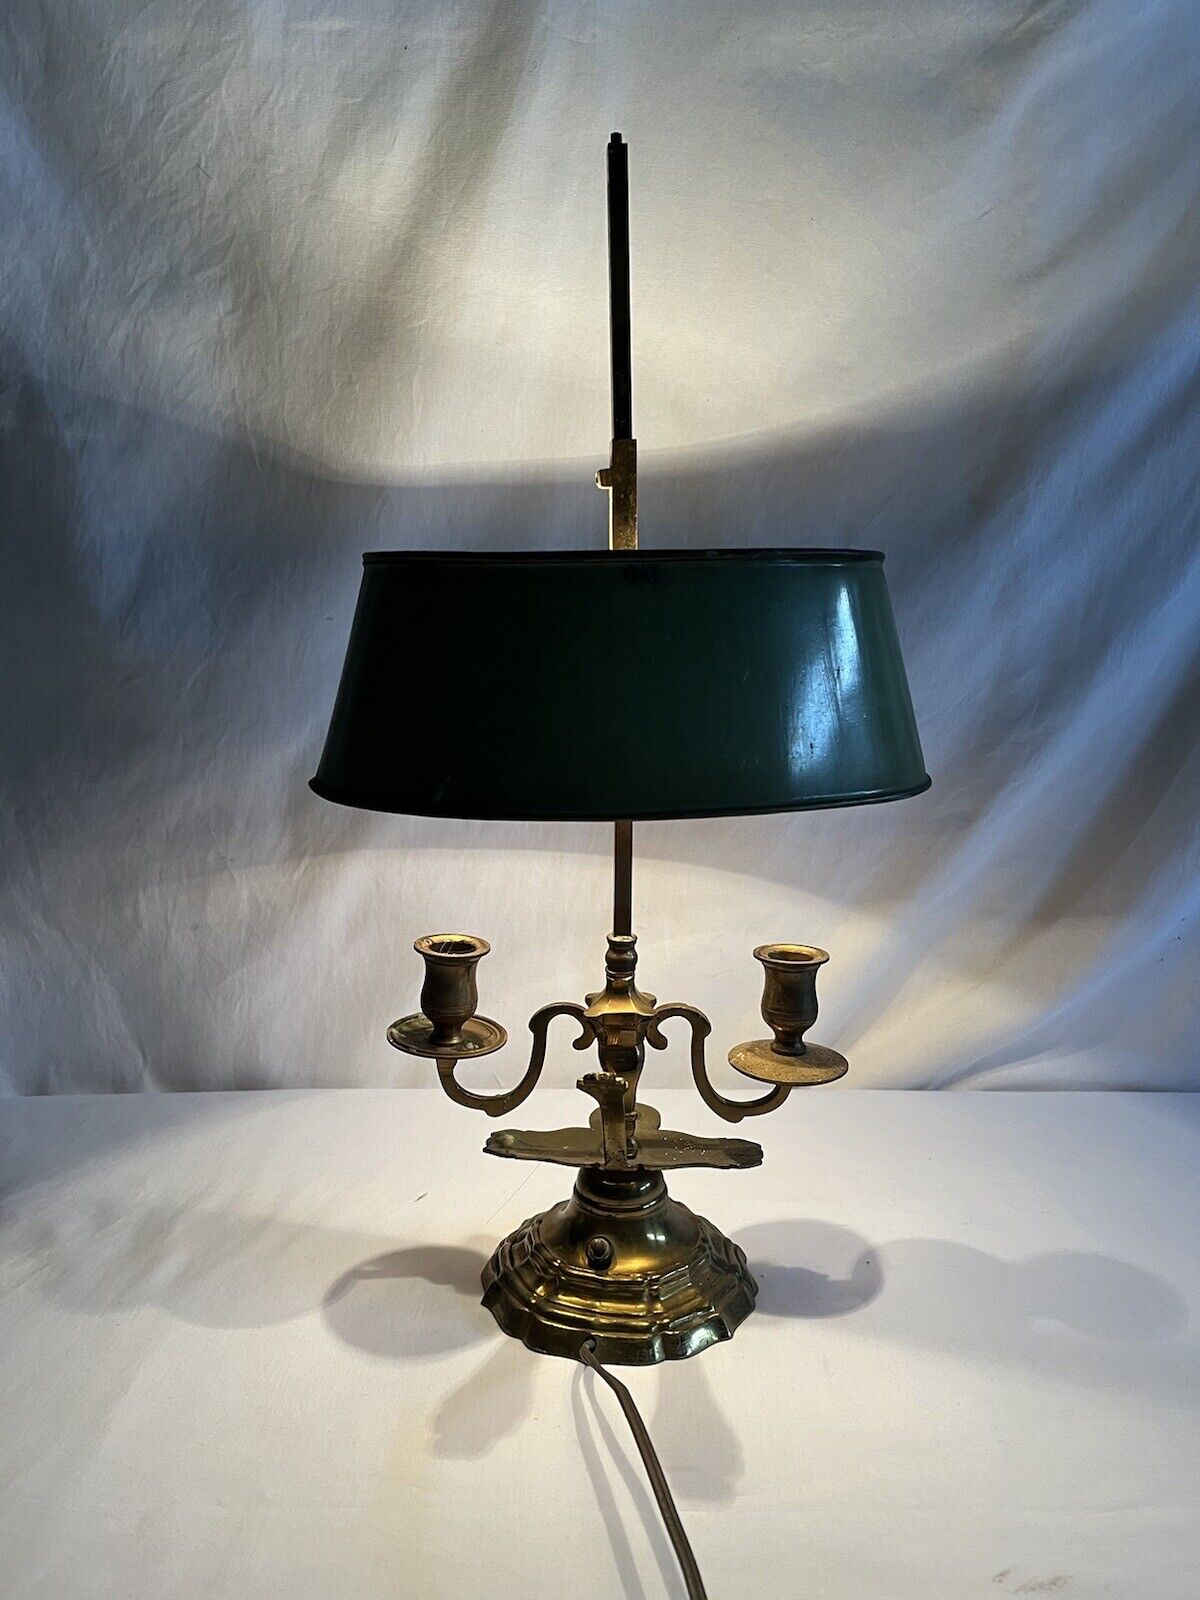 Vintage Antique French Bouillotte Double Candlestick Brass Table Lamp #341 READ